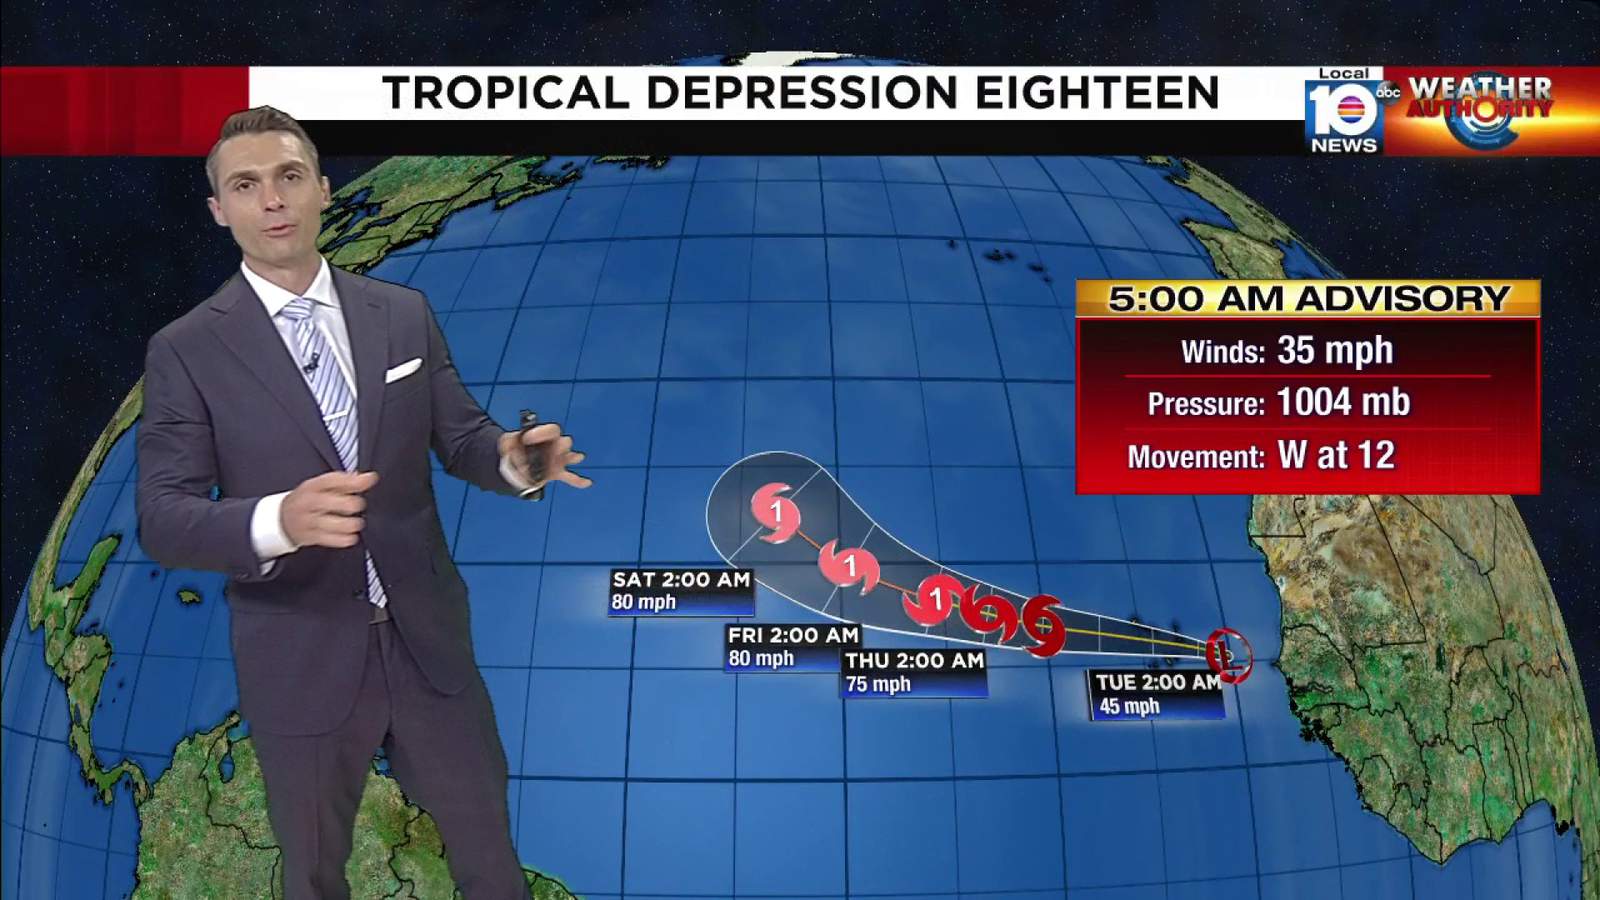 Two tropical storms (Paulette and Rene) forecast to form today